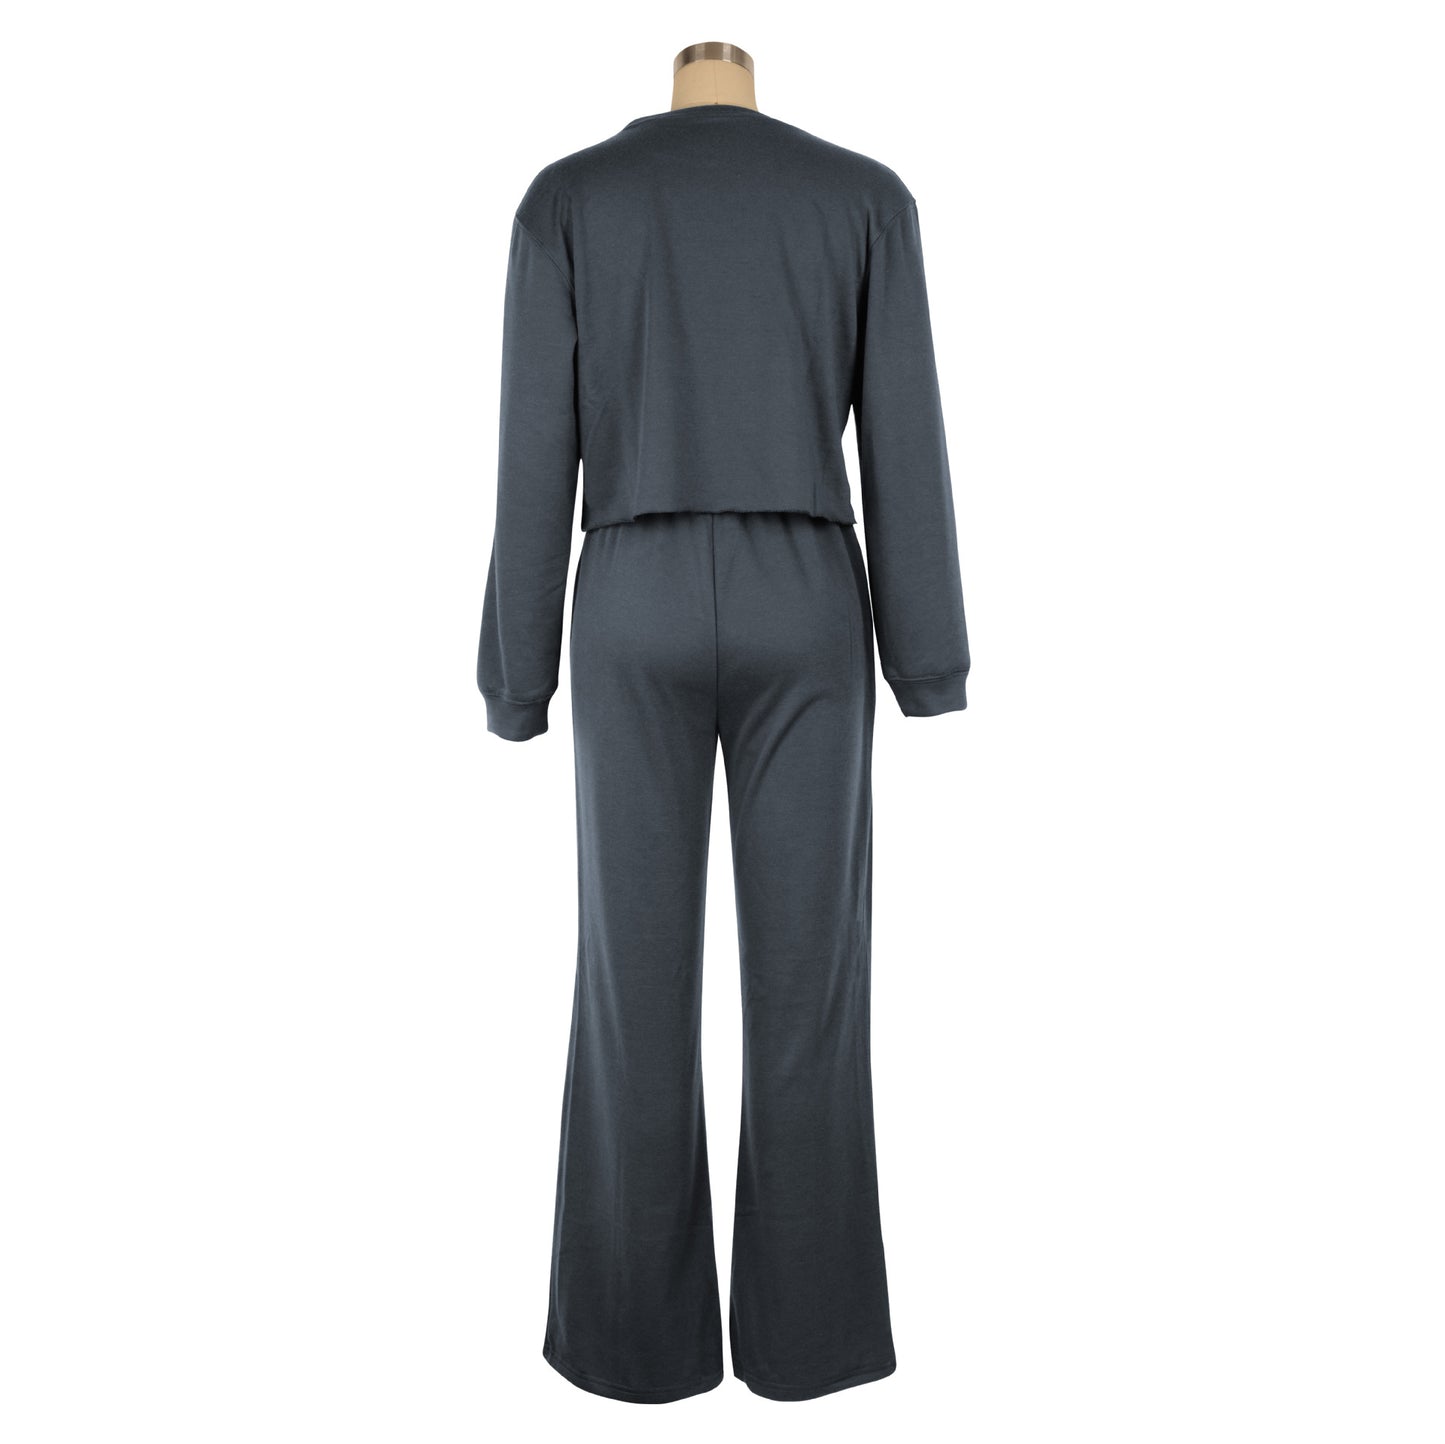 BamBam Women Solid Long Sleeve Top and Pant Casual Two-piece Set - BamBam